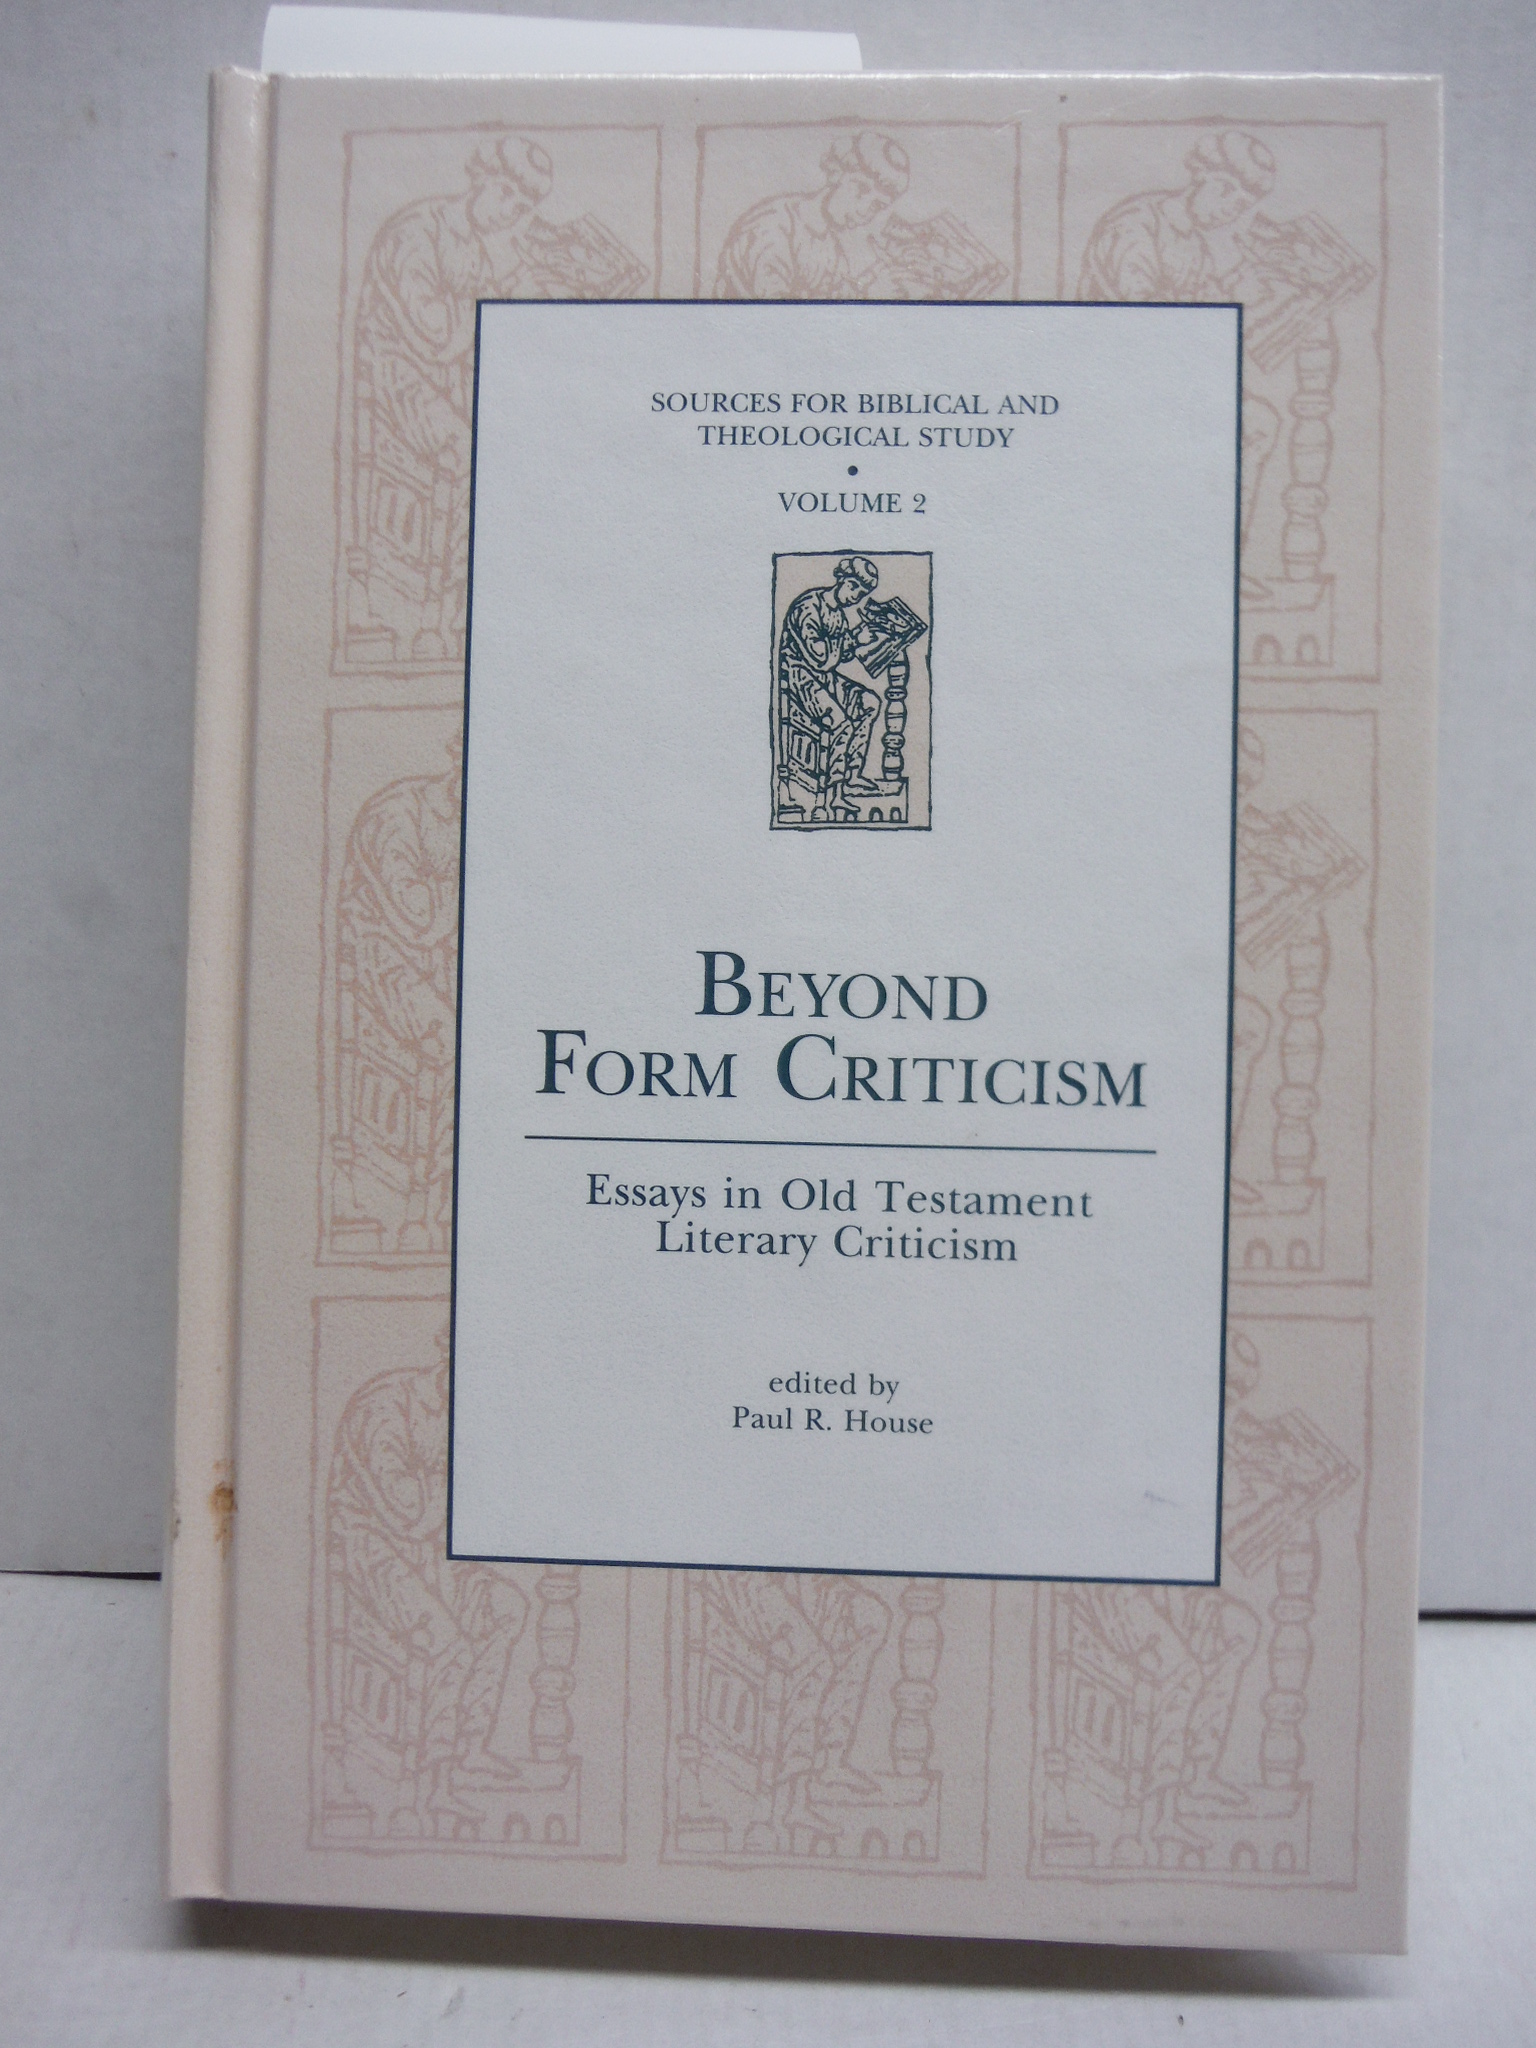 Beyond Form Criticism: Essays in Old Testament Literary Criticism (Sources for B